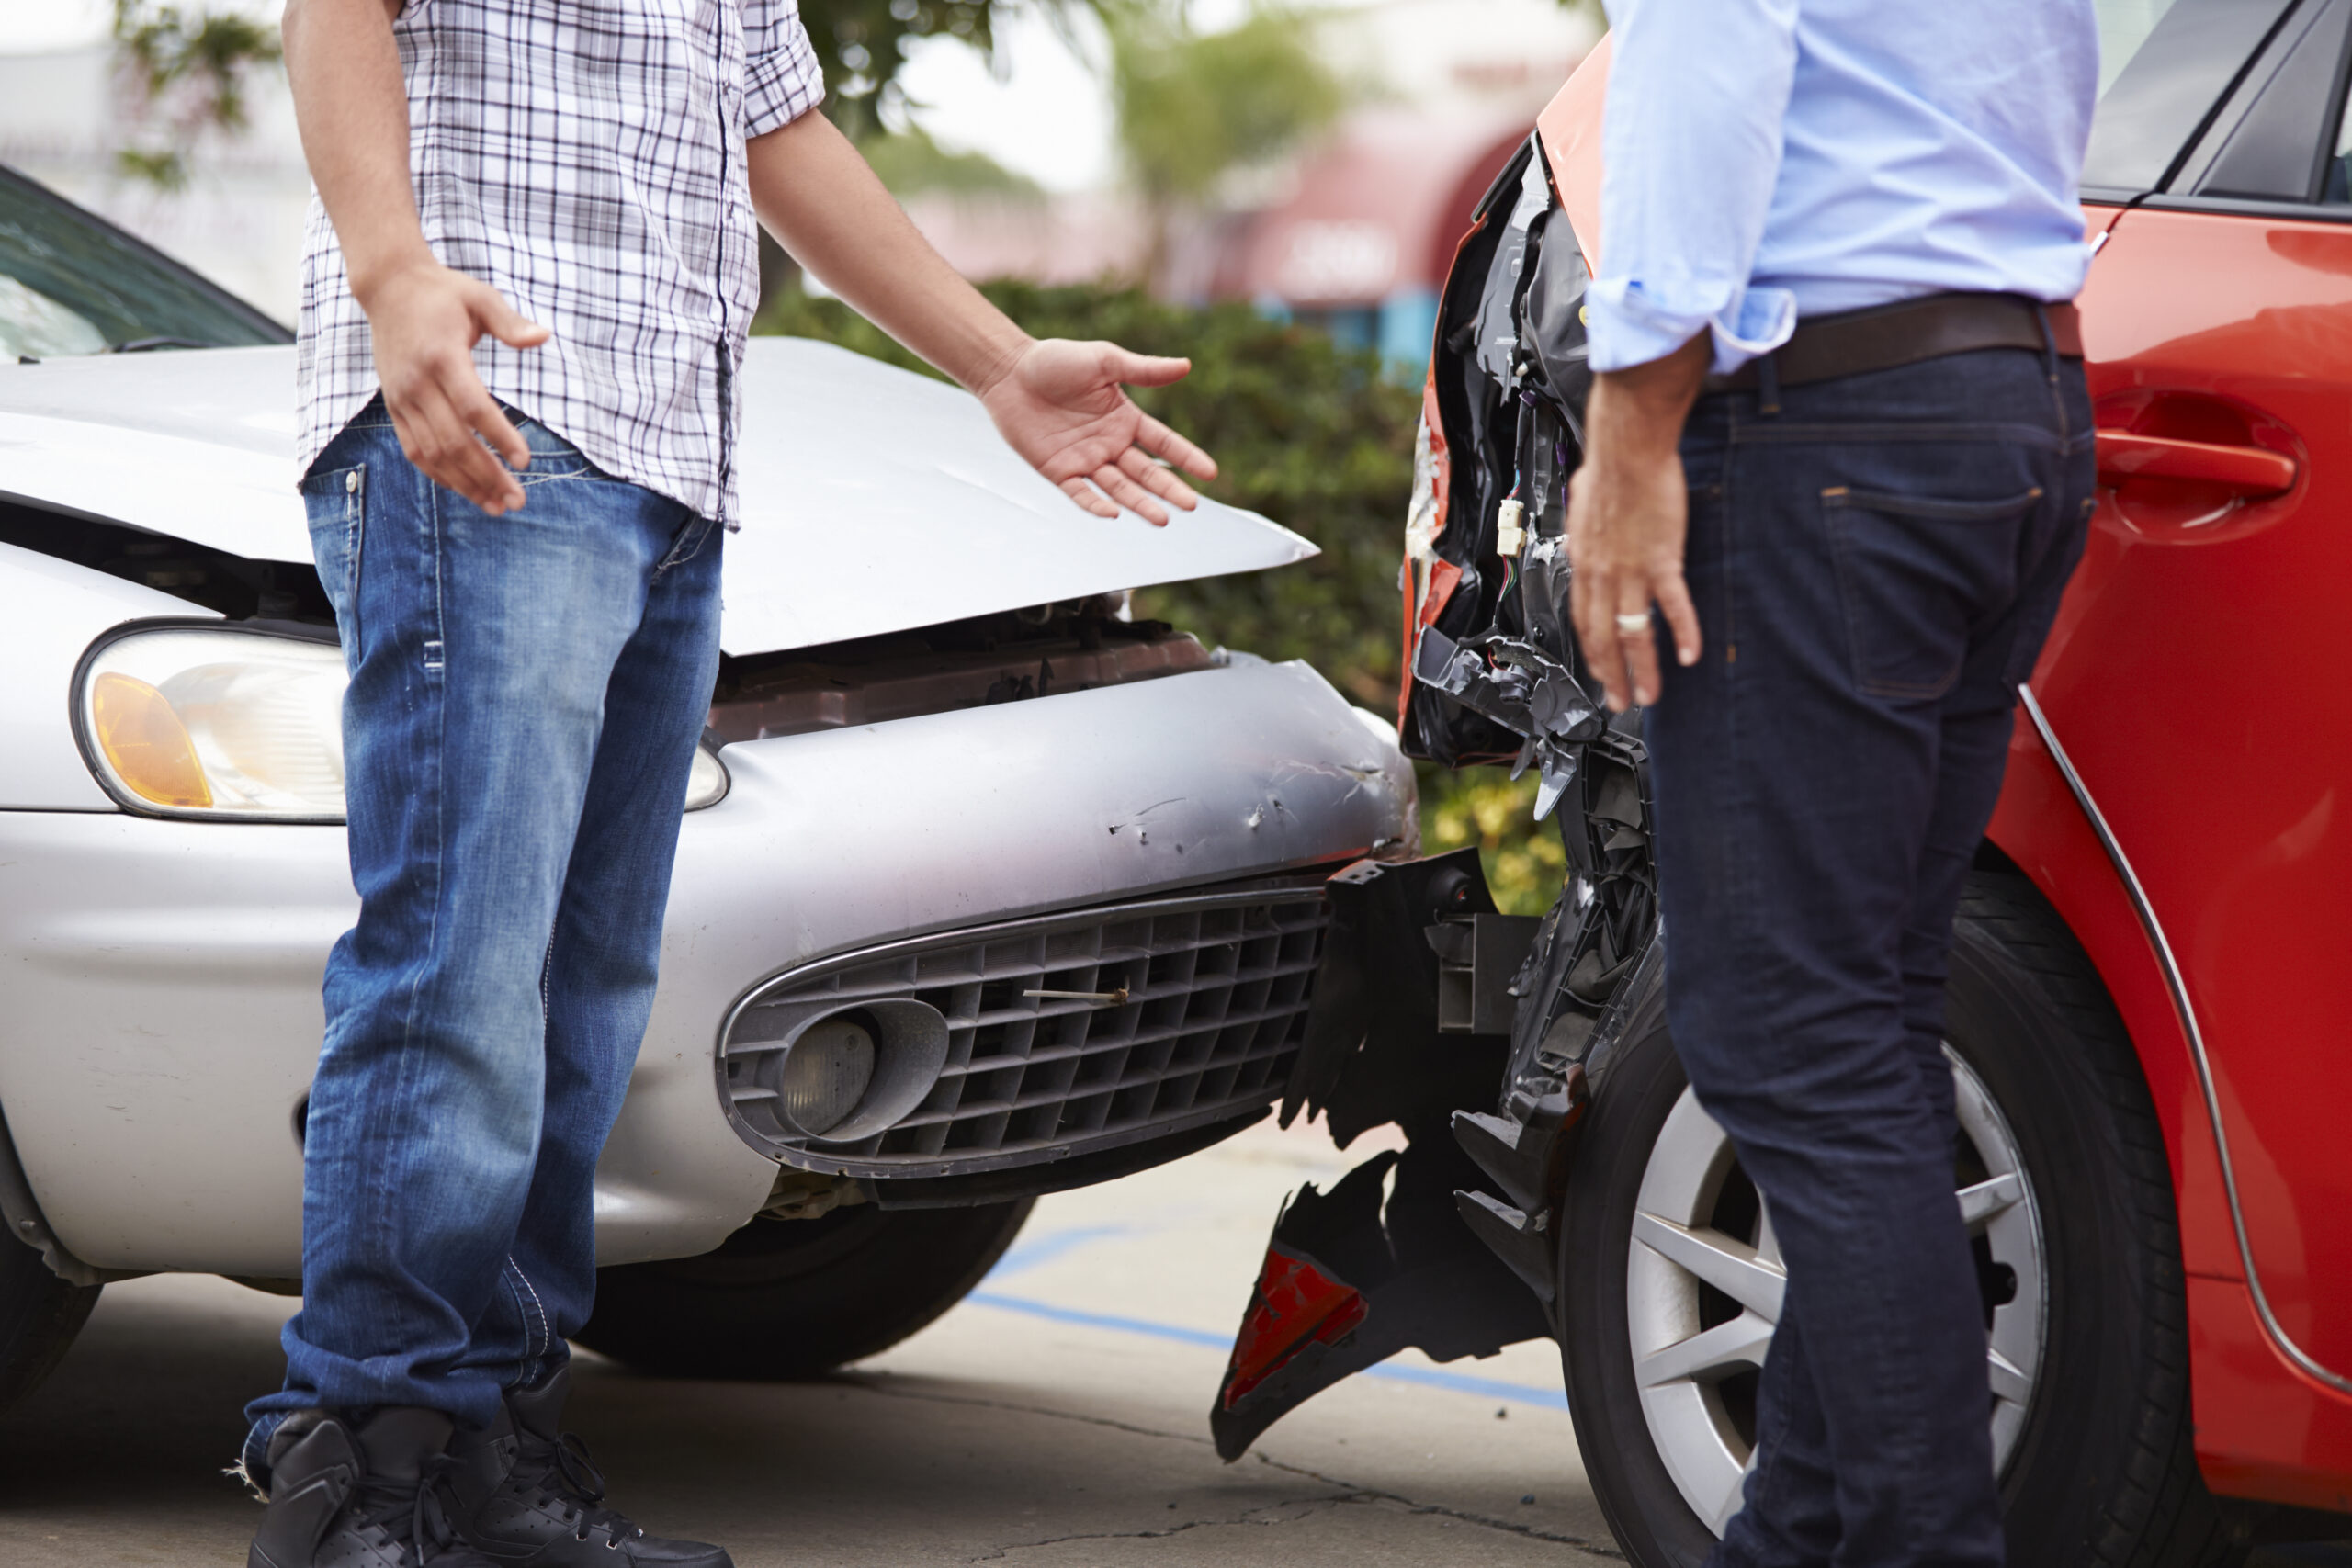 What If Both Parties Are Partially At Fault in a Car Accident?